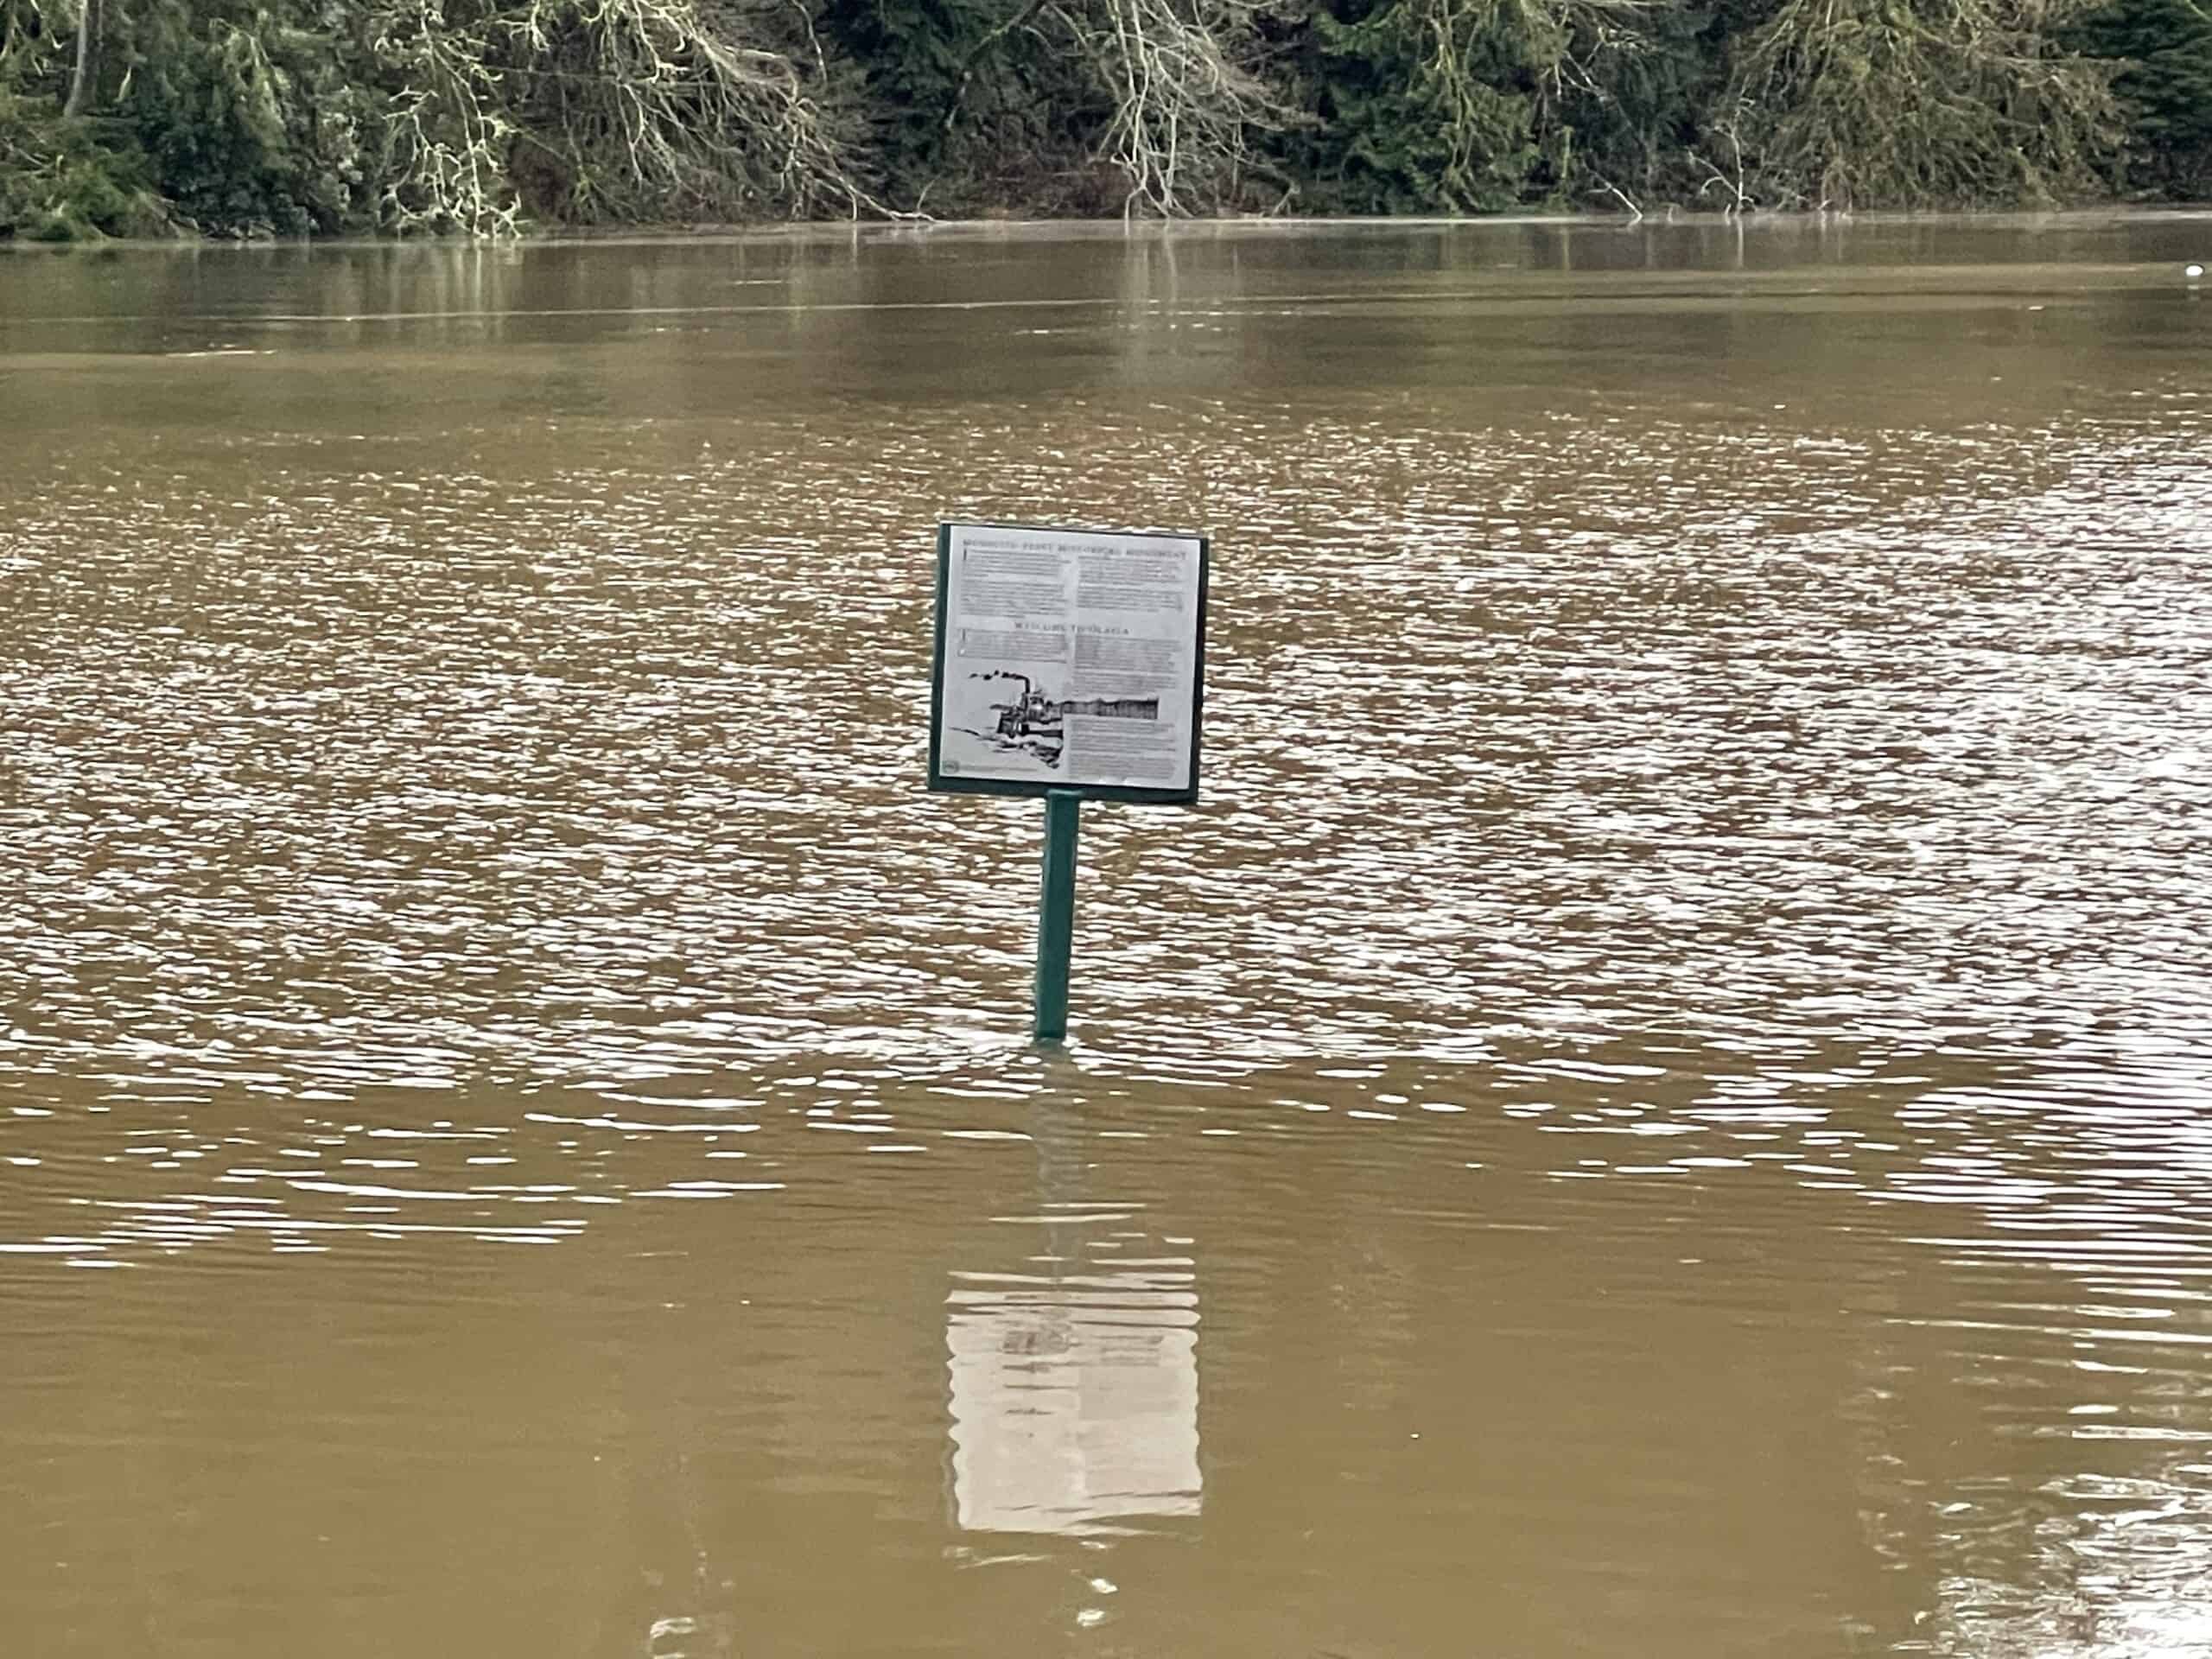 Gregg Olsen photographed a mosquito fleet sign that's usually on high ground swallowed up by the Olalla lagoon.